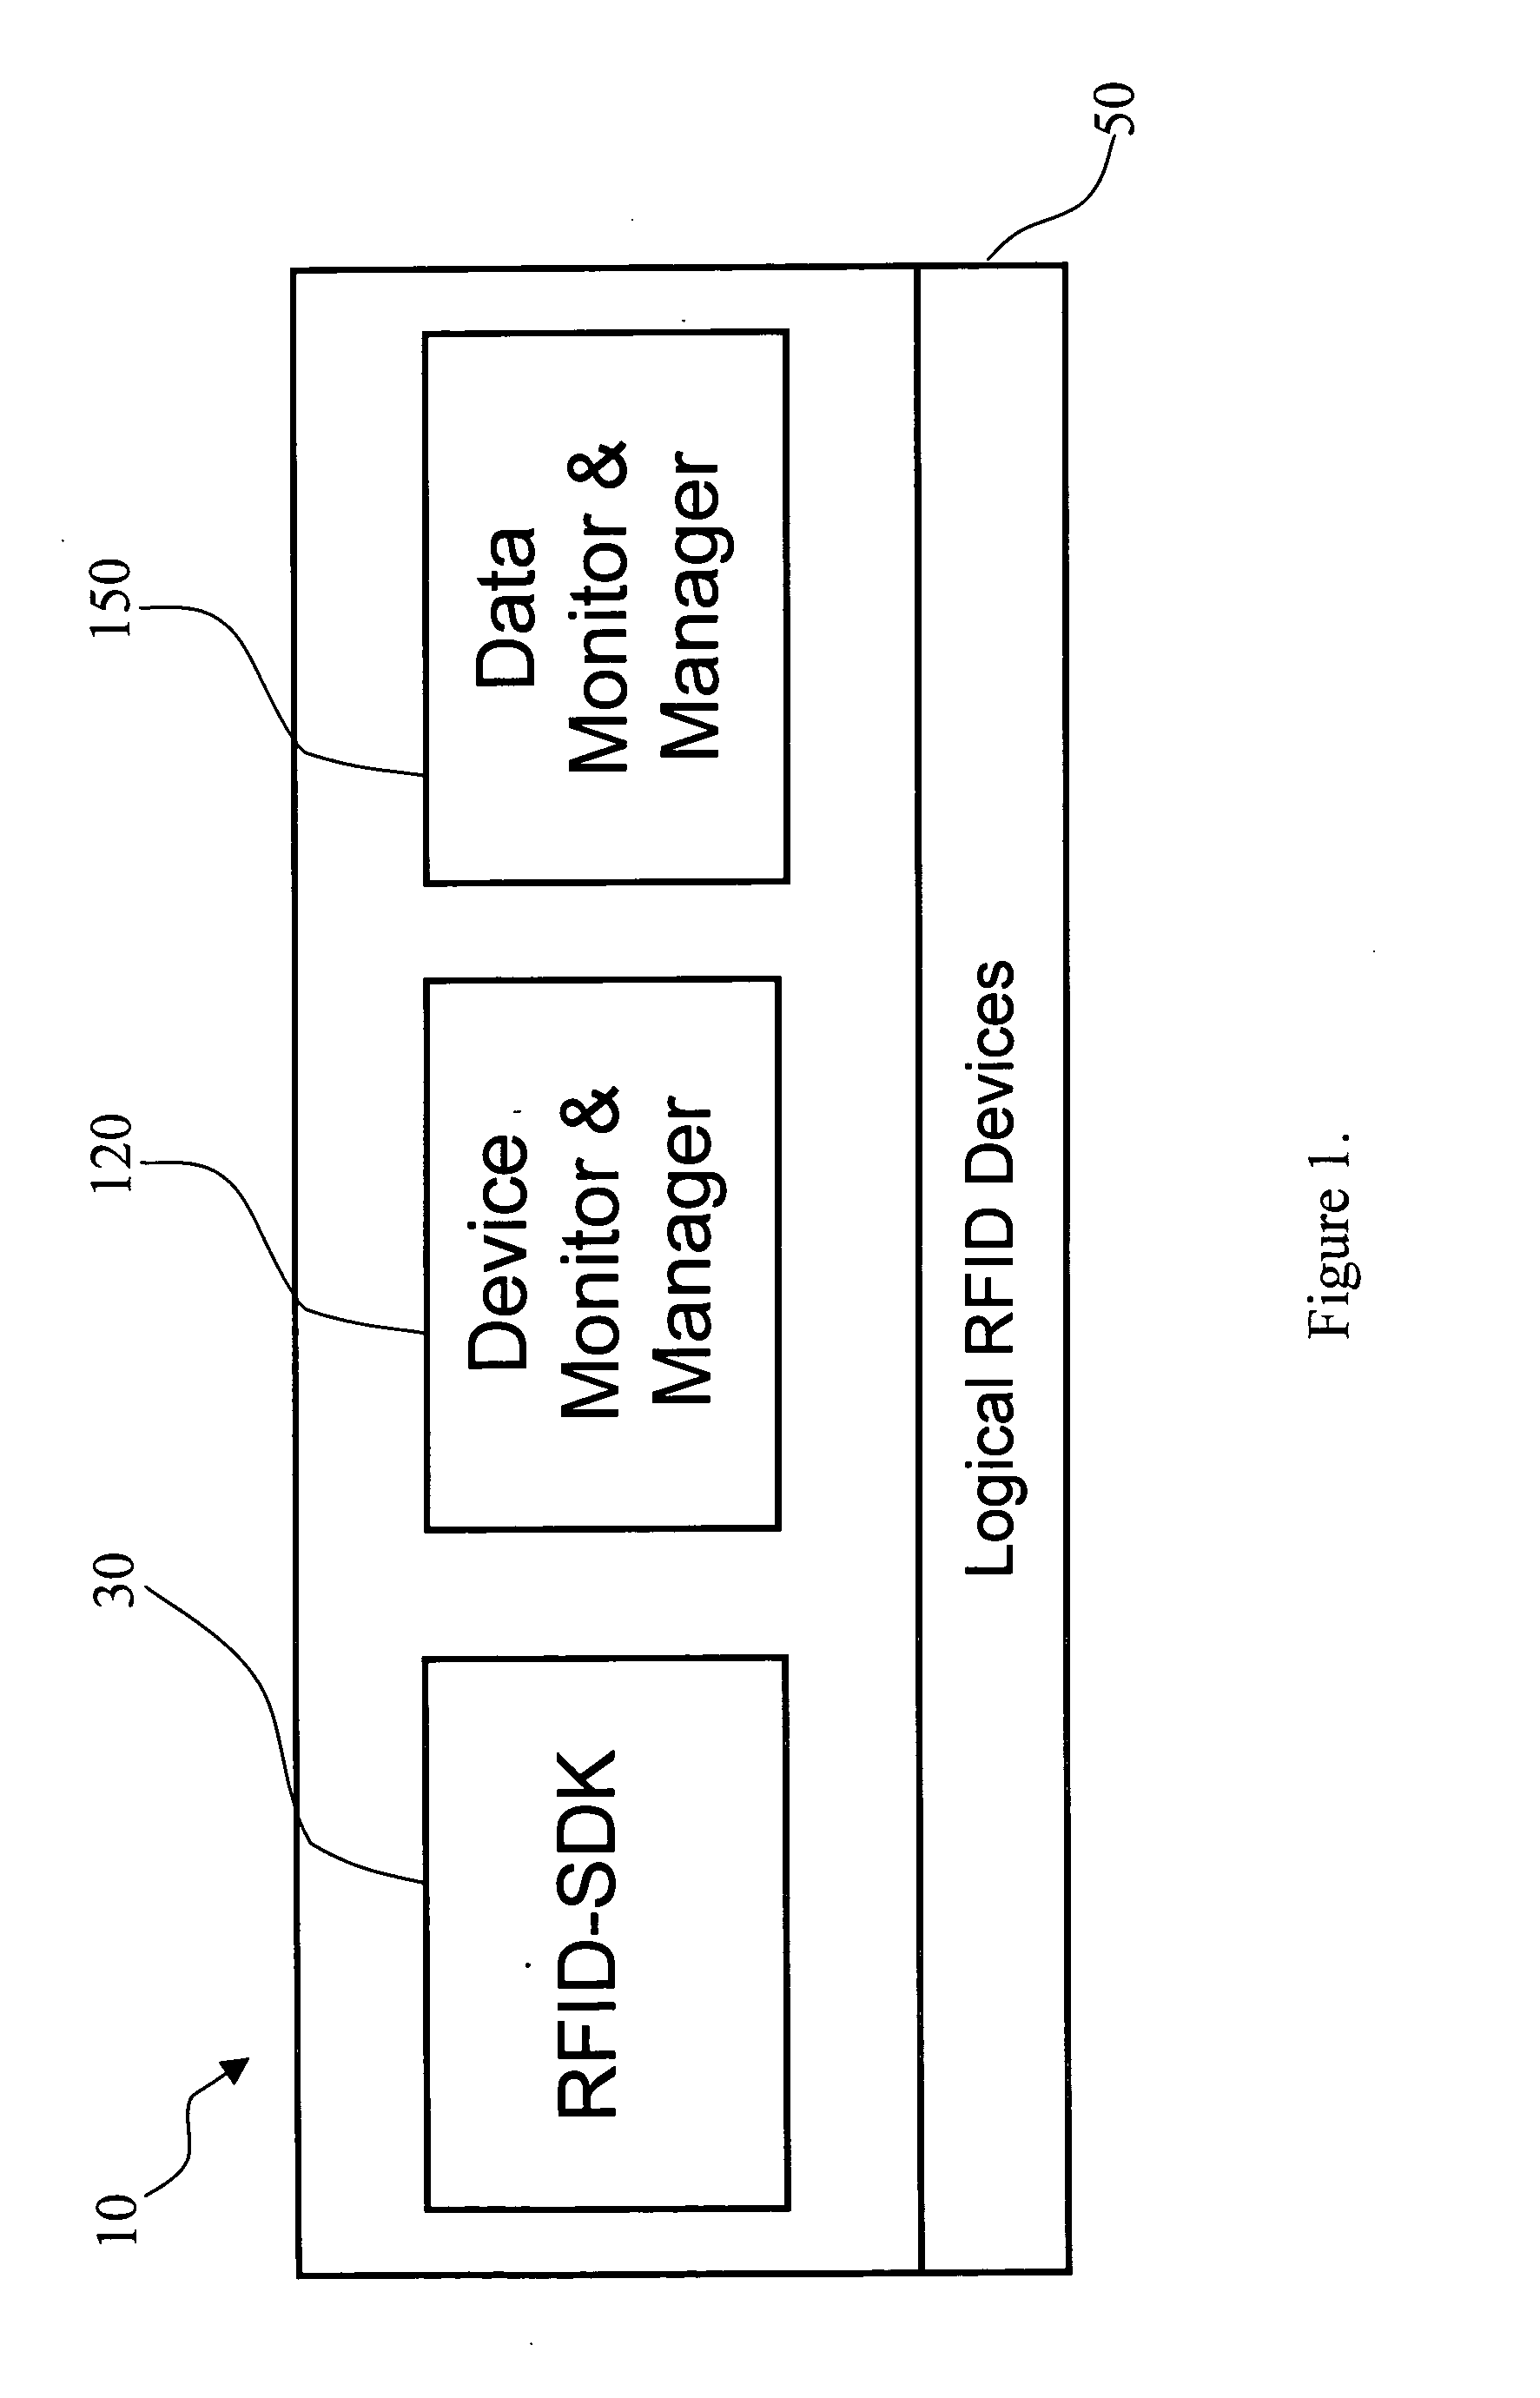 System for developing and deploying radio frequency identification enabled software applications